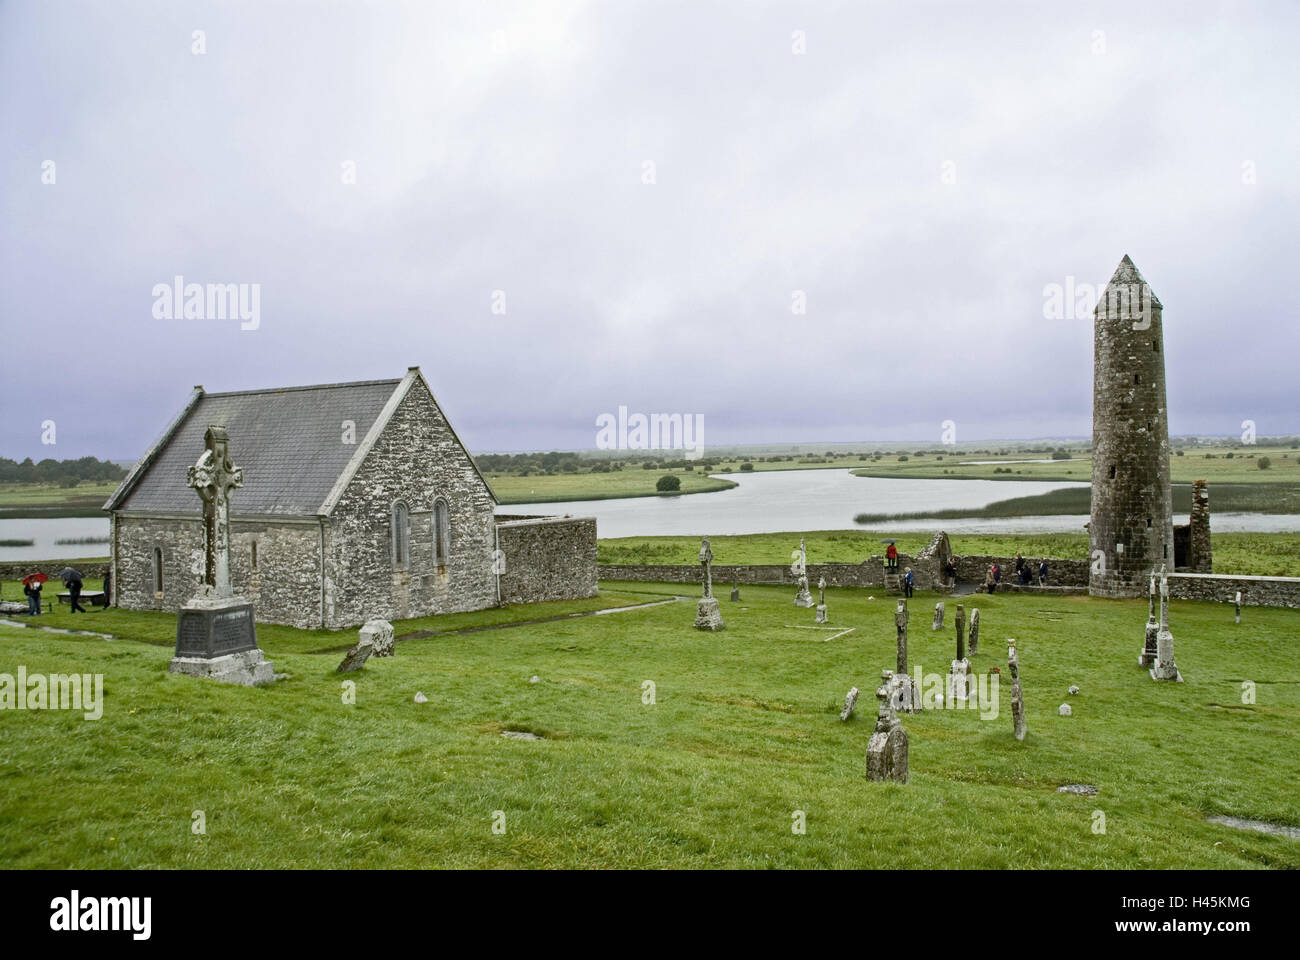 Ireland, Clonmacnoise, cloister settlement, round tower, cemetery, tourist, scenery, river, cloister, cloister plant, ruin, cloister ruin, tower, meadow, tomb, tombs, crosses, stone crosses, religion, tourism, place of interest, Shannon river, deserted, heaven, cloudies, Stock Photo